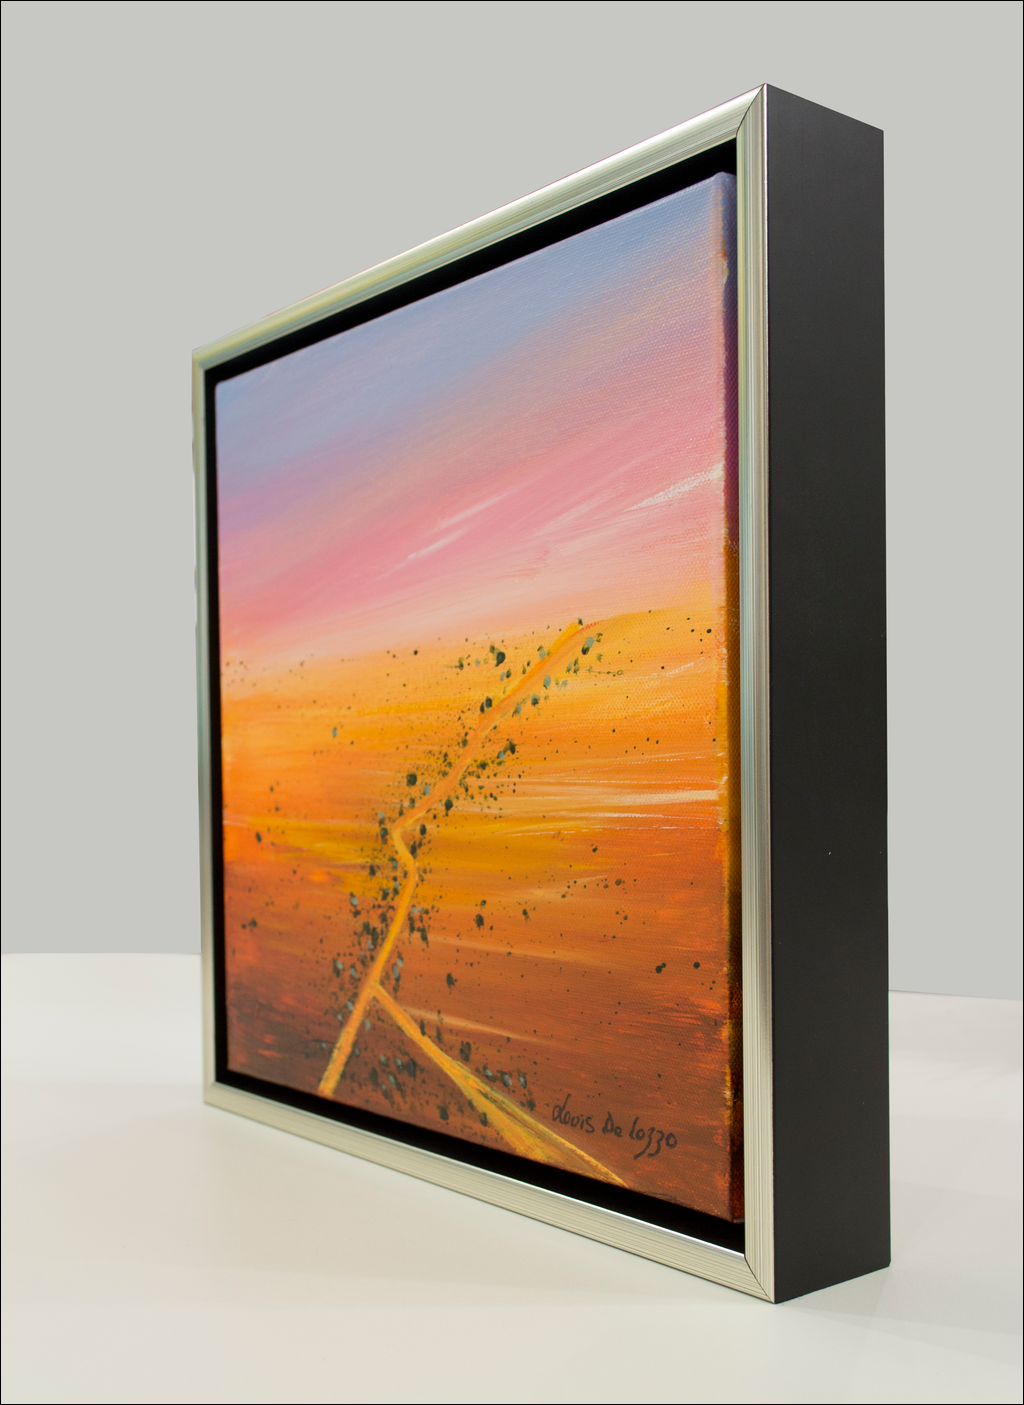 Framed Side View Of Landscape Painting "Study For Towards The Horizon NT" By Louis Dalozzo